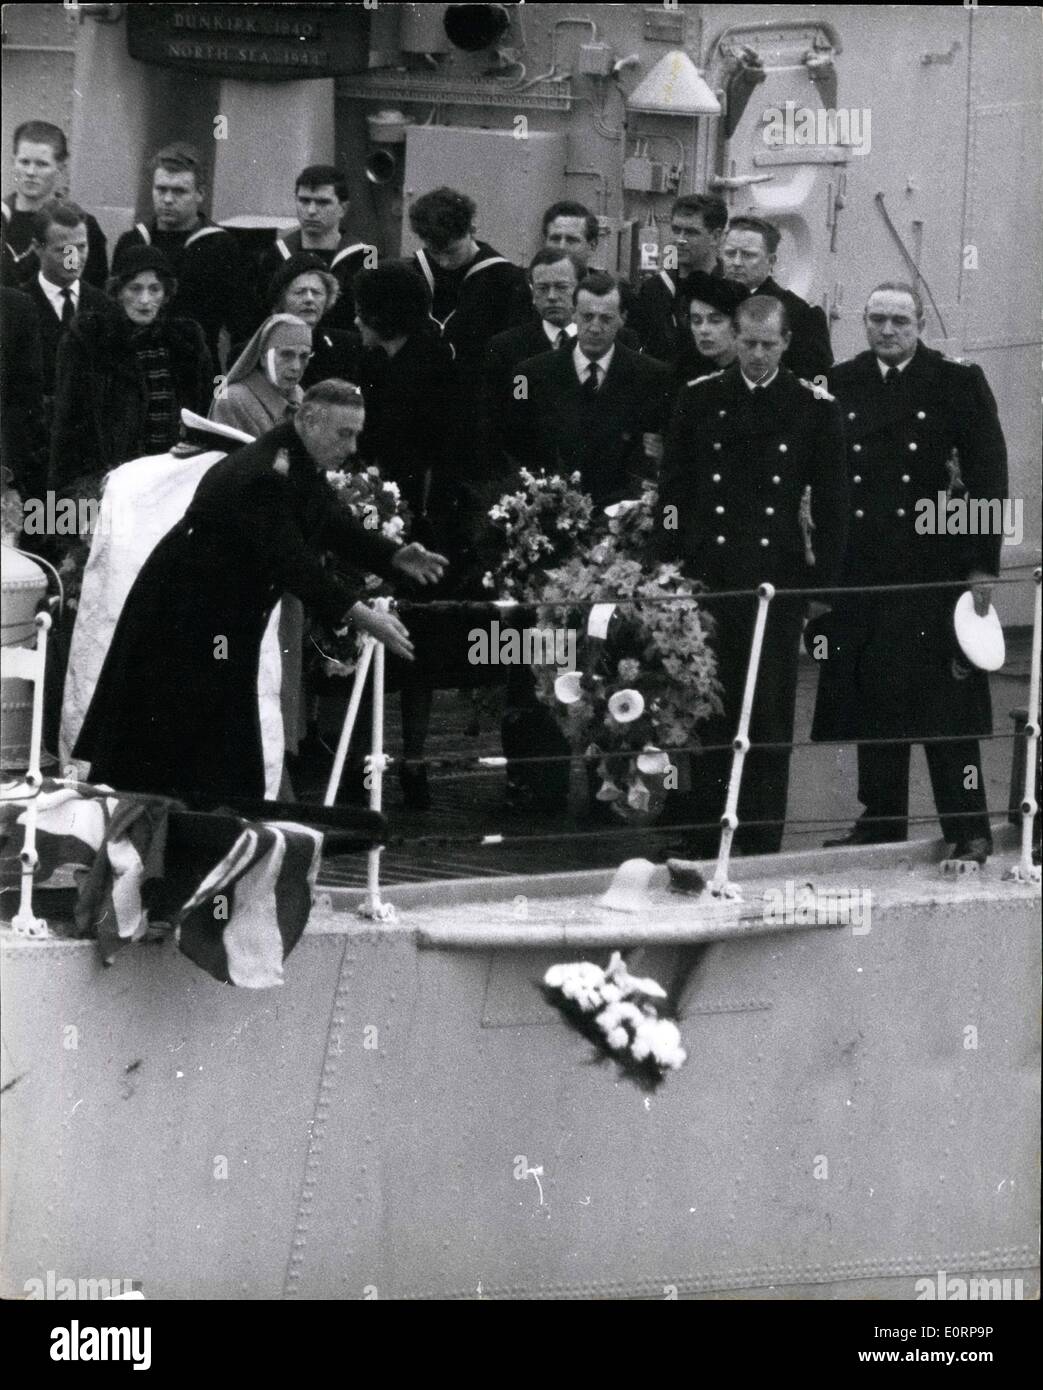 Feb. 02, 1960 - Lady Mountbatten is buried at sea as she had requested; With a simple but deeply moving ceremony, the body of Countess Mountbatten of Burma was taken out to sea aboard the frigate H.M.S. Wakeful form Portsmouth yesterday for burial, four miles of south of Nab Tower, off the Isle of Wight. Photo shows Earl Mountbatten casts his wreath into the sea after the burial service on board H.M.S. Wakeful yesterday. Also in the picture are Prince Philip, his mother Princess Andrew and the Mountbatten daughters, Lady Brabourne, and Lady Pamela Hicks. Stock Photo